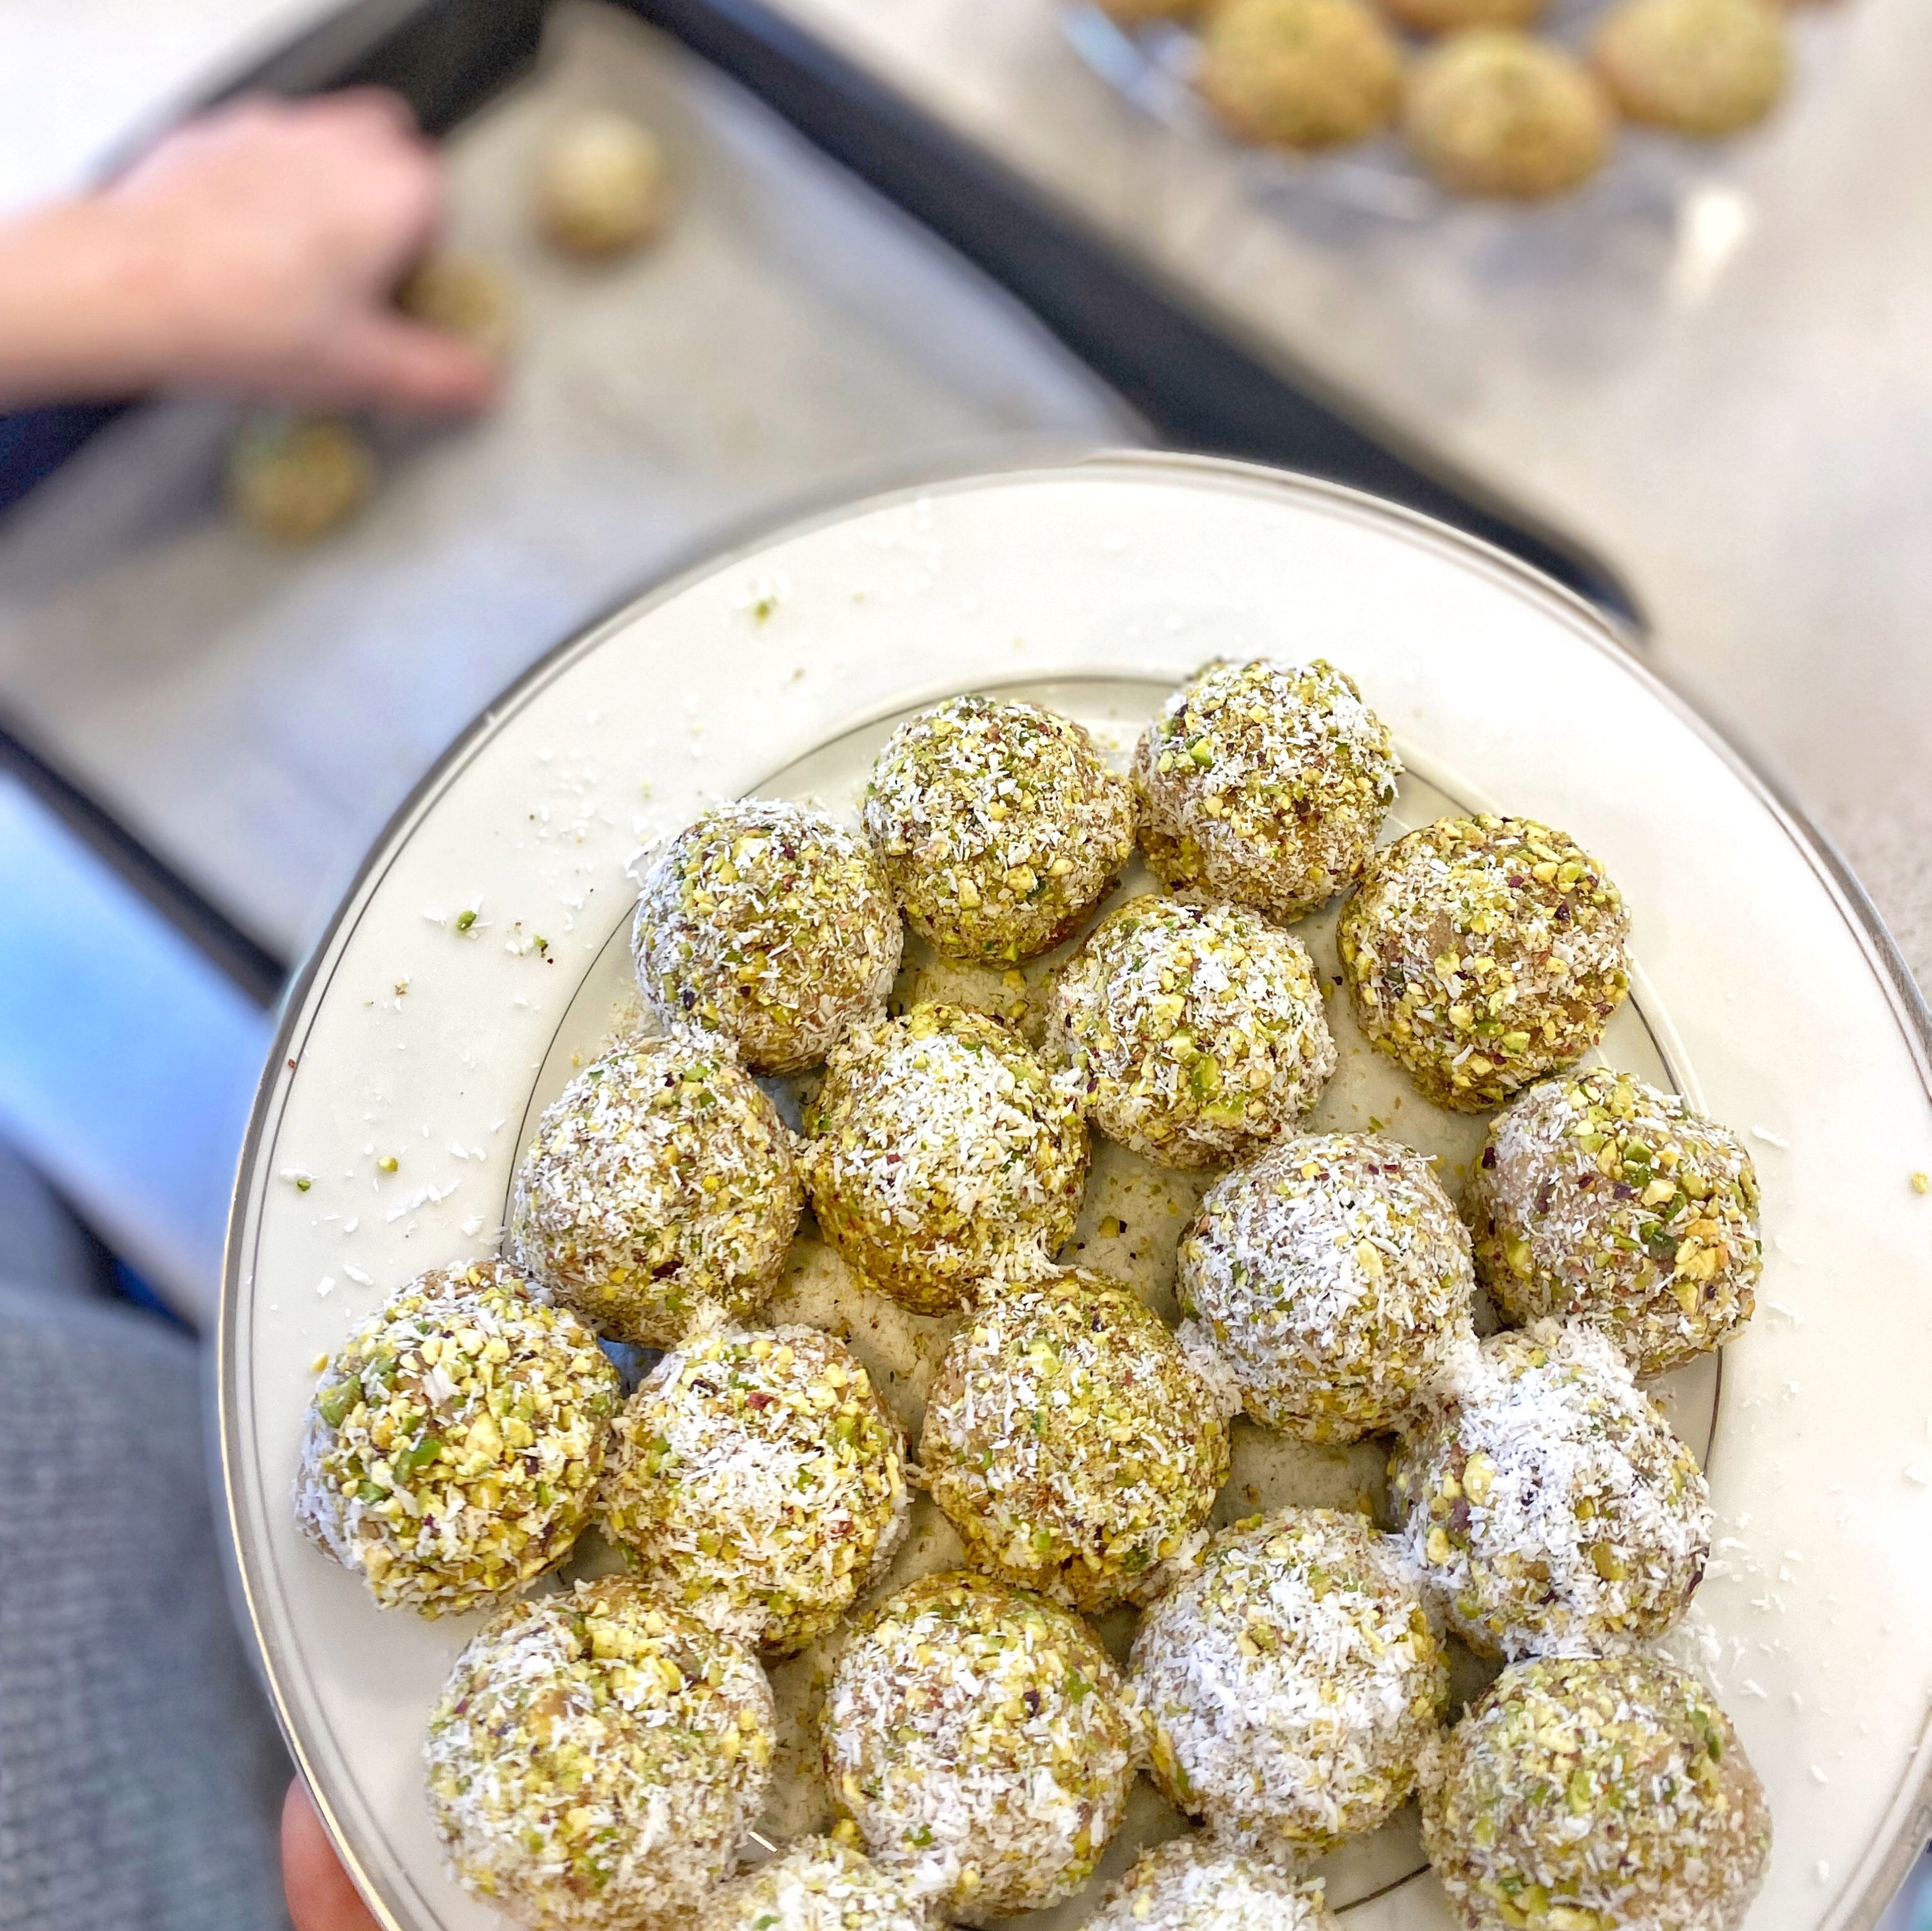 Roll cookie dough balls into shredded coconut and ground pistachios (optional).